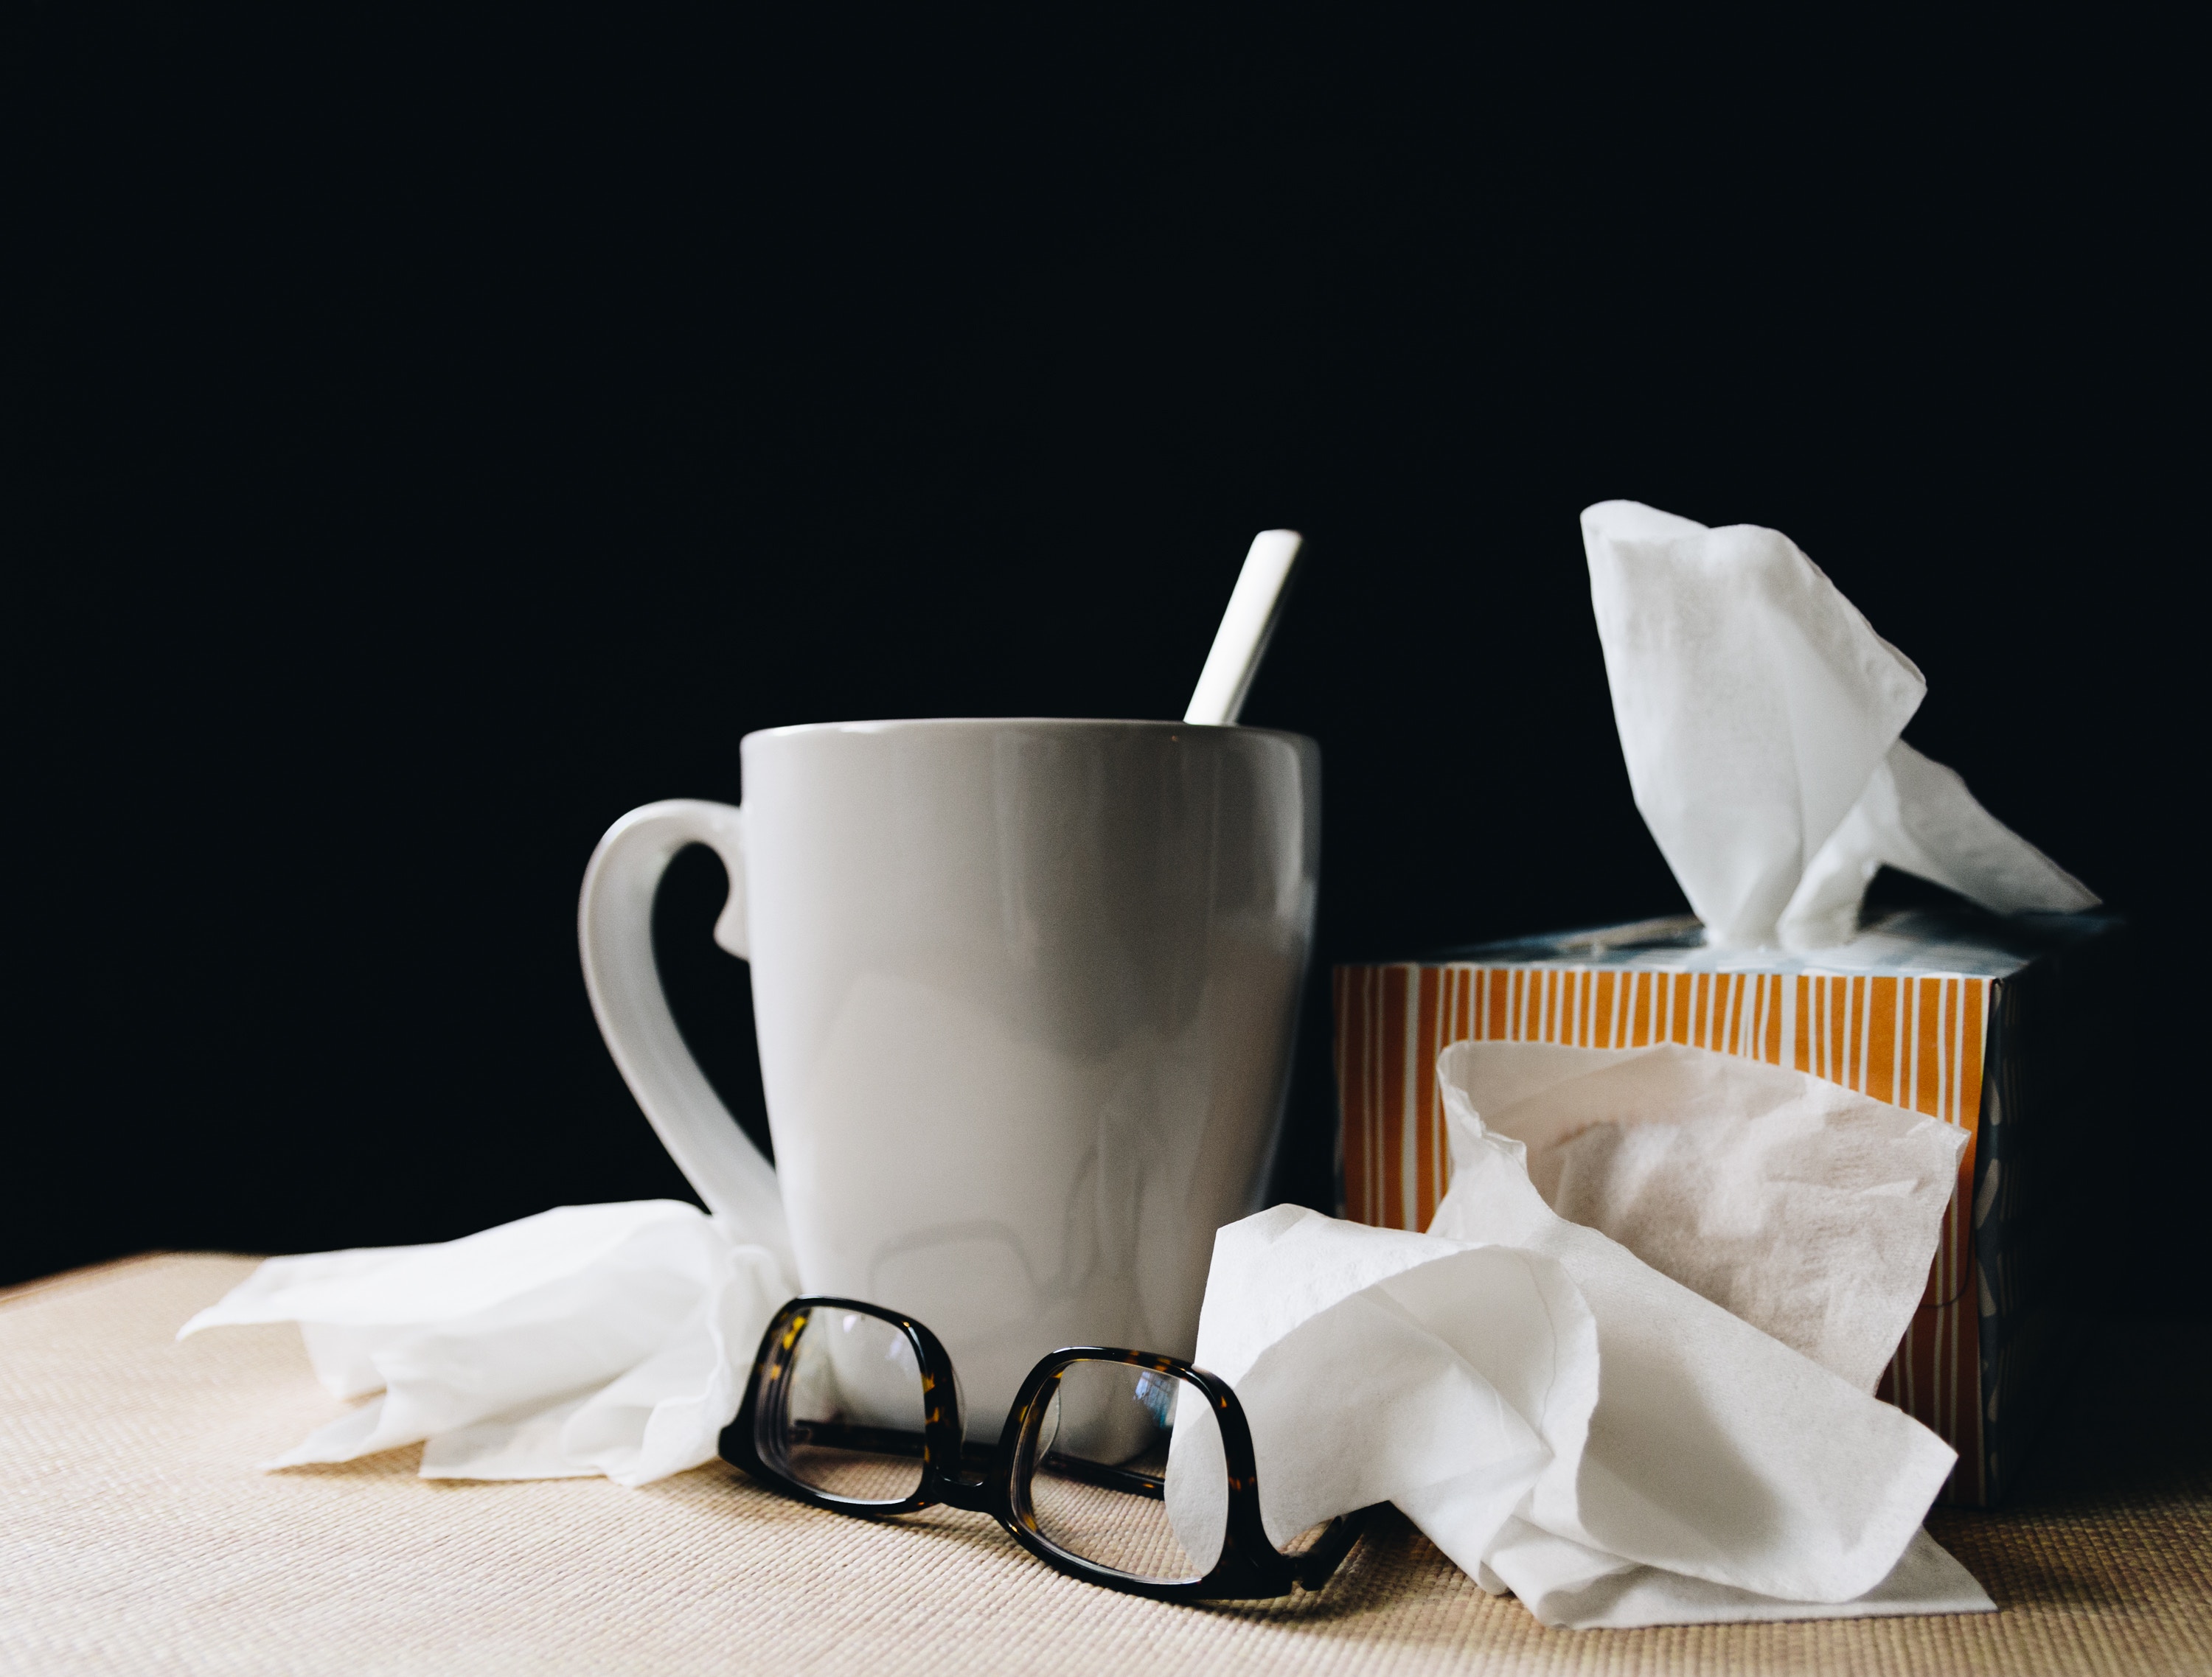 cup and tissues to represent blog by wellspace on preventing office illness